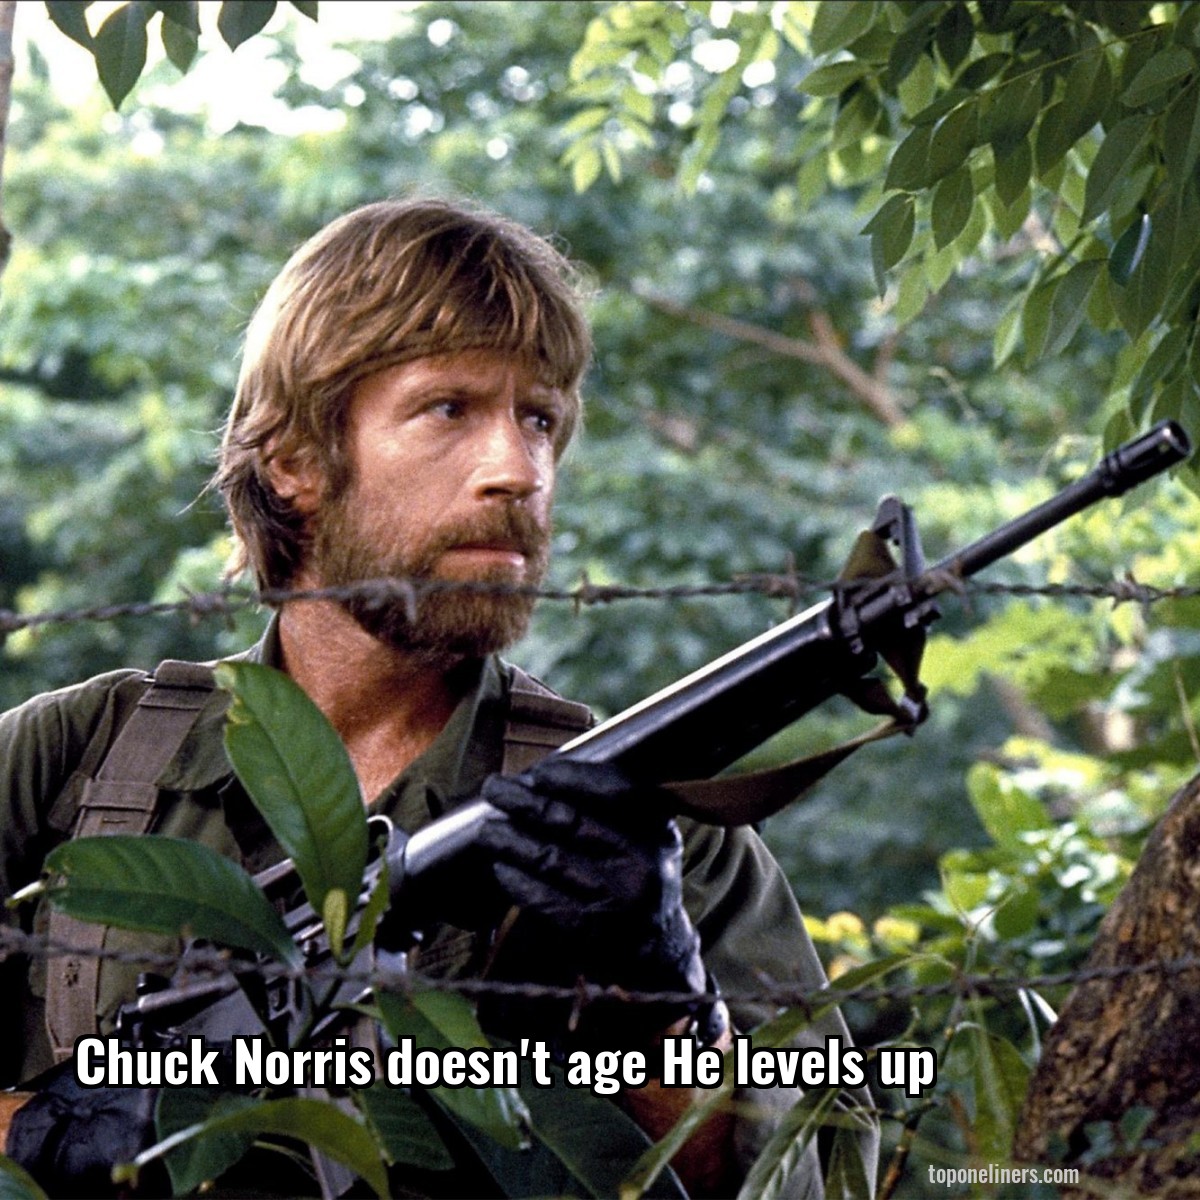 Chuck Norris doesn't age He levels up